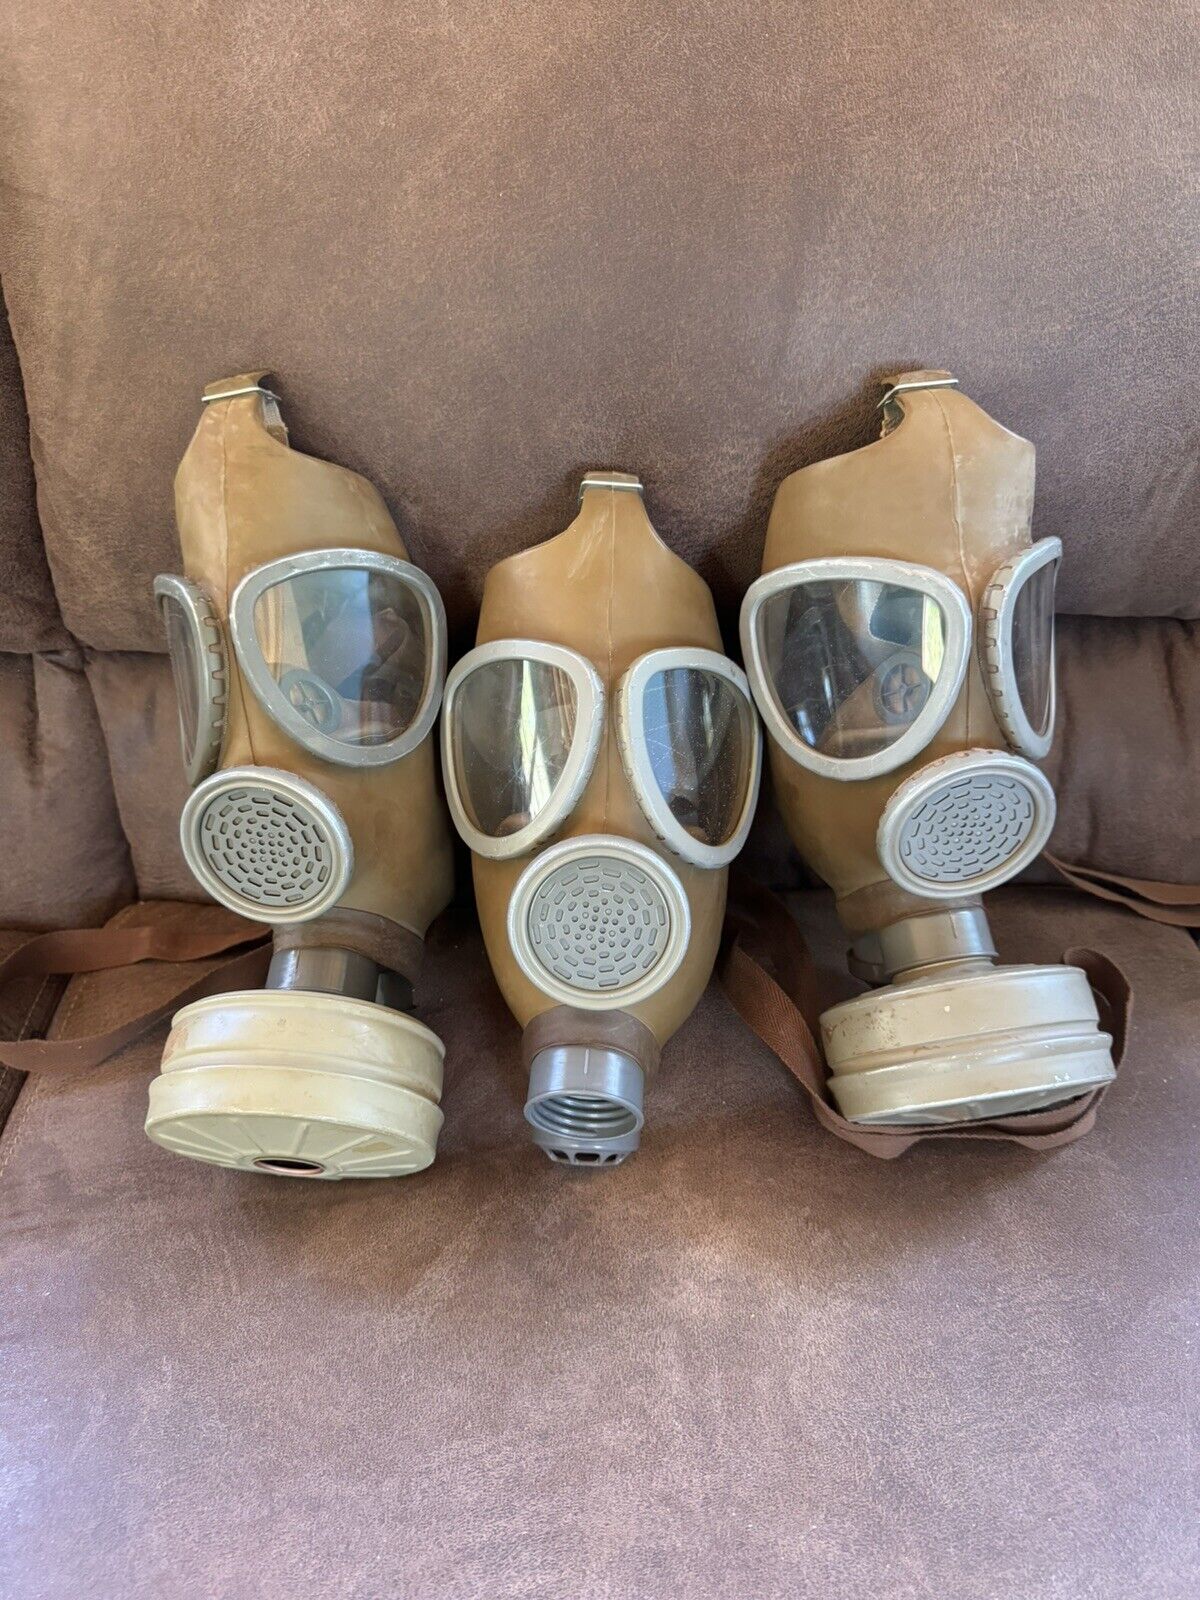 3 Pack Of Military Czech Gas Full Face Mask With Filters—military Surplus